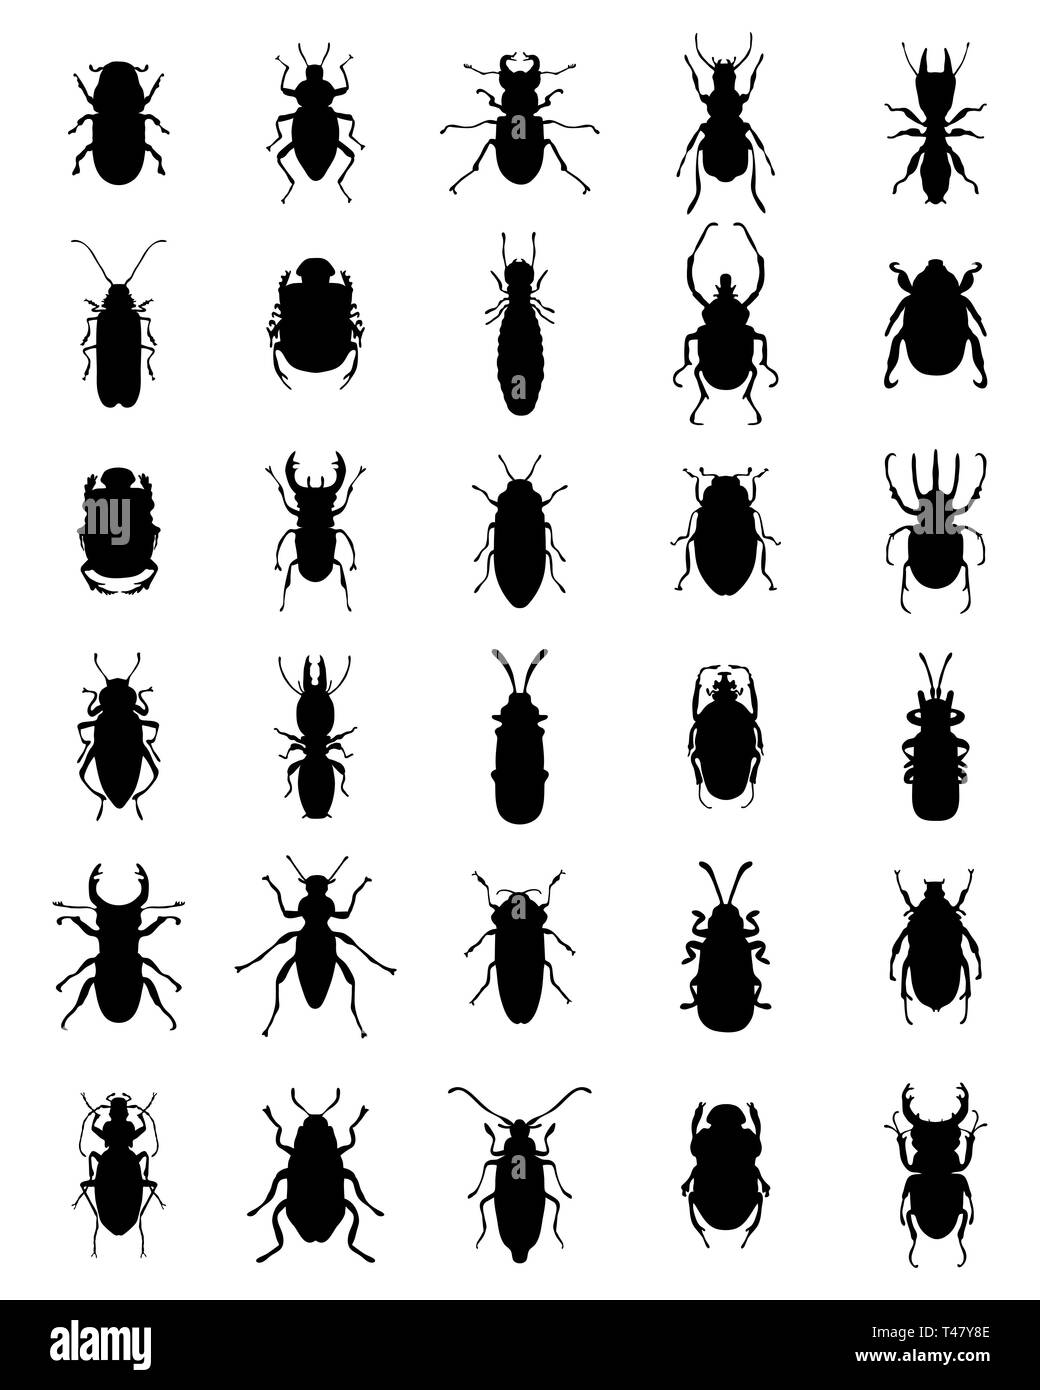 Black silhouettes of different bugs on a white background Stock Photo